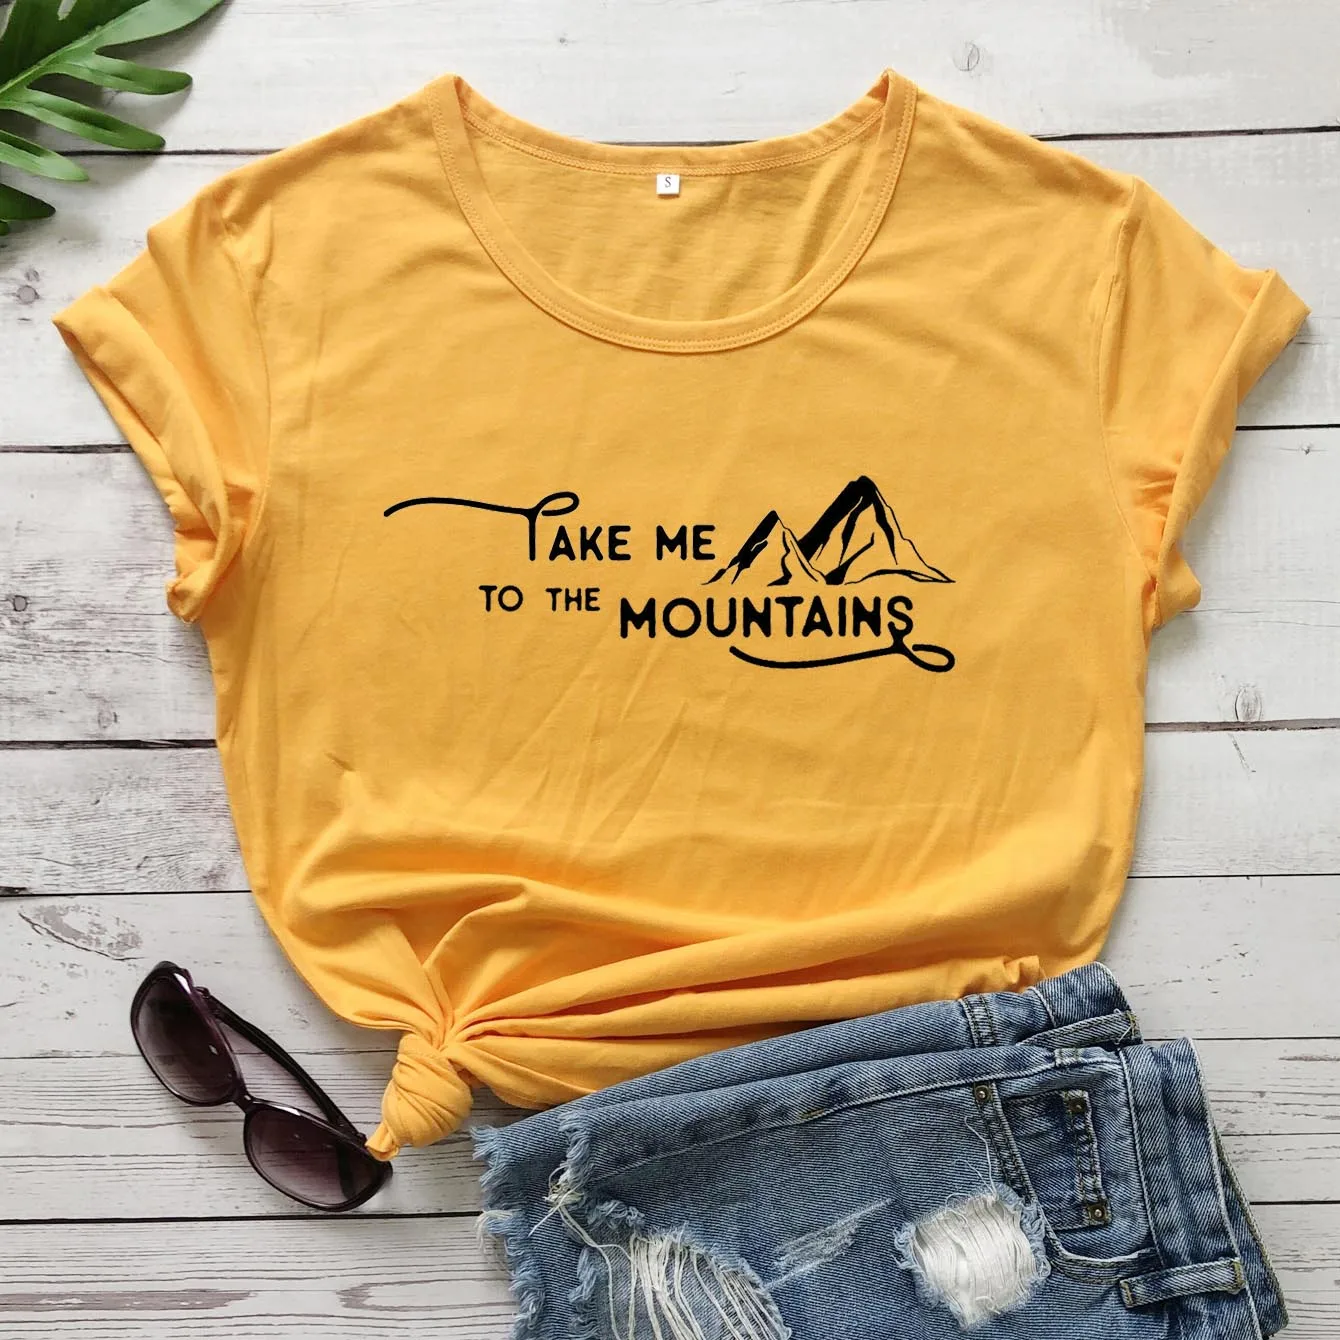 

Take me to the mountains women fashion cotton casual graphic quote slogan grunge tumblr hipster t shirt gift tees art tops R184